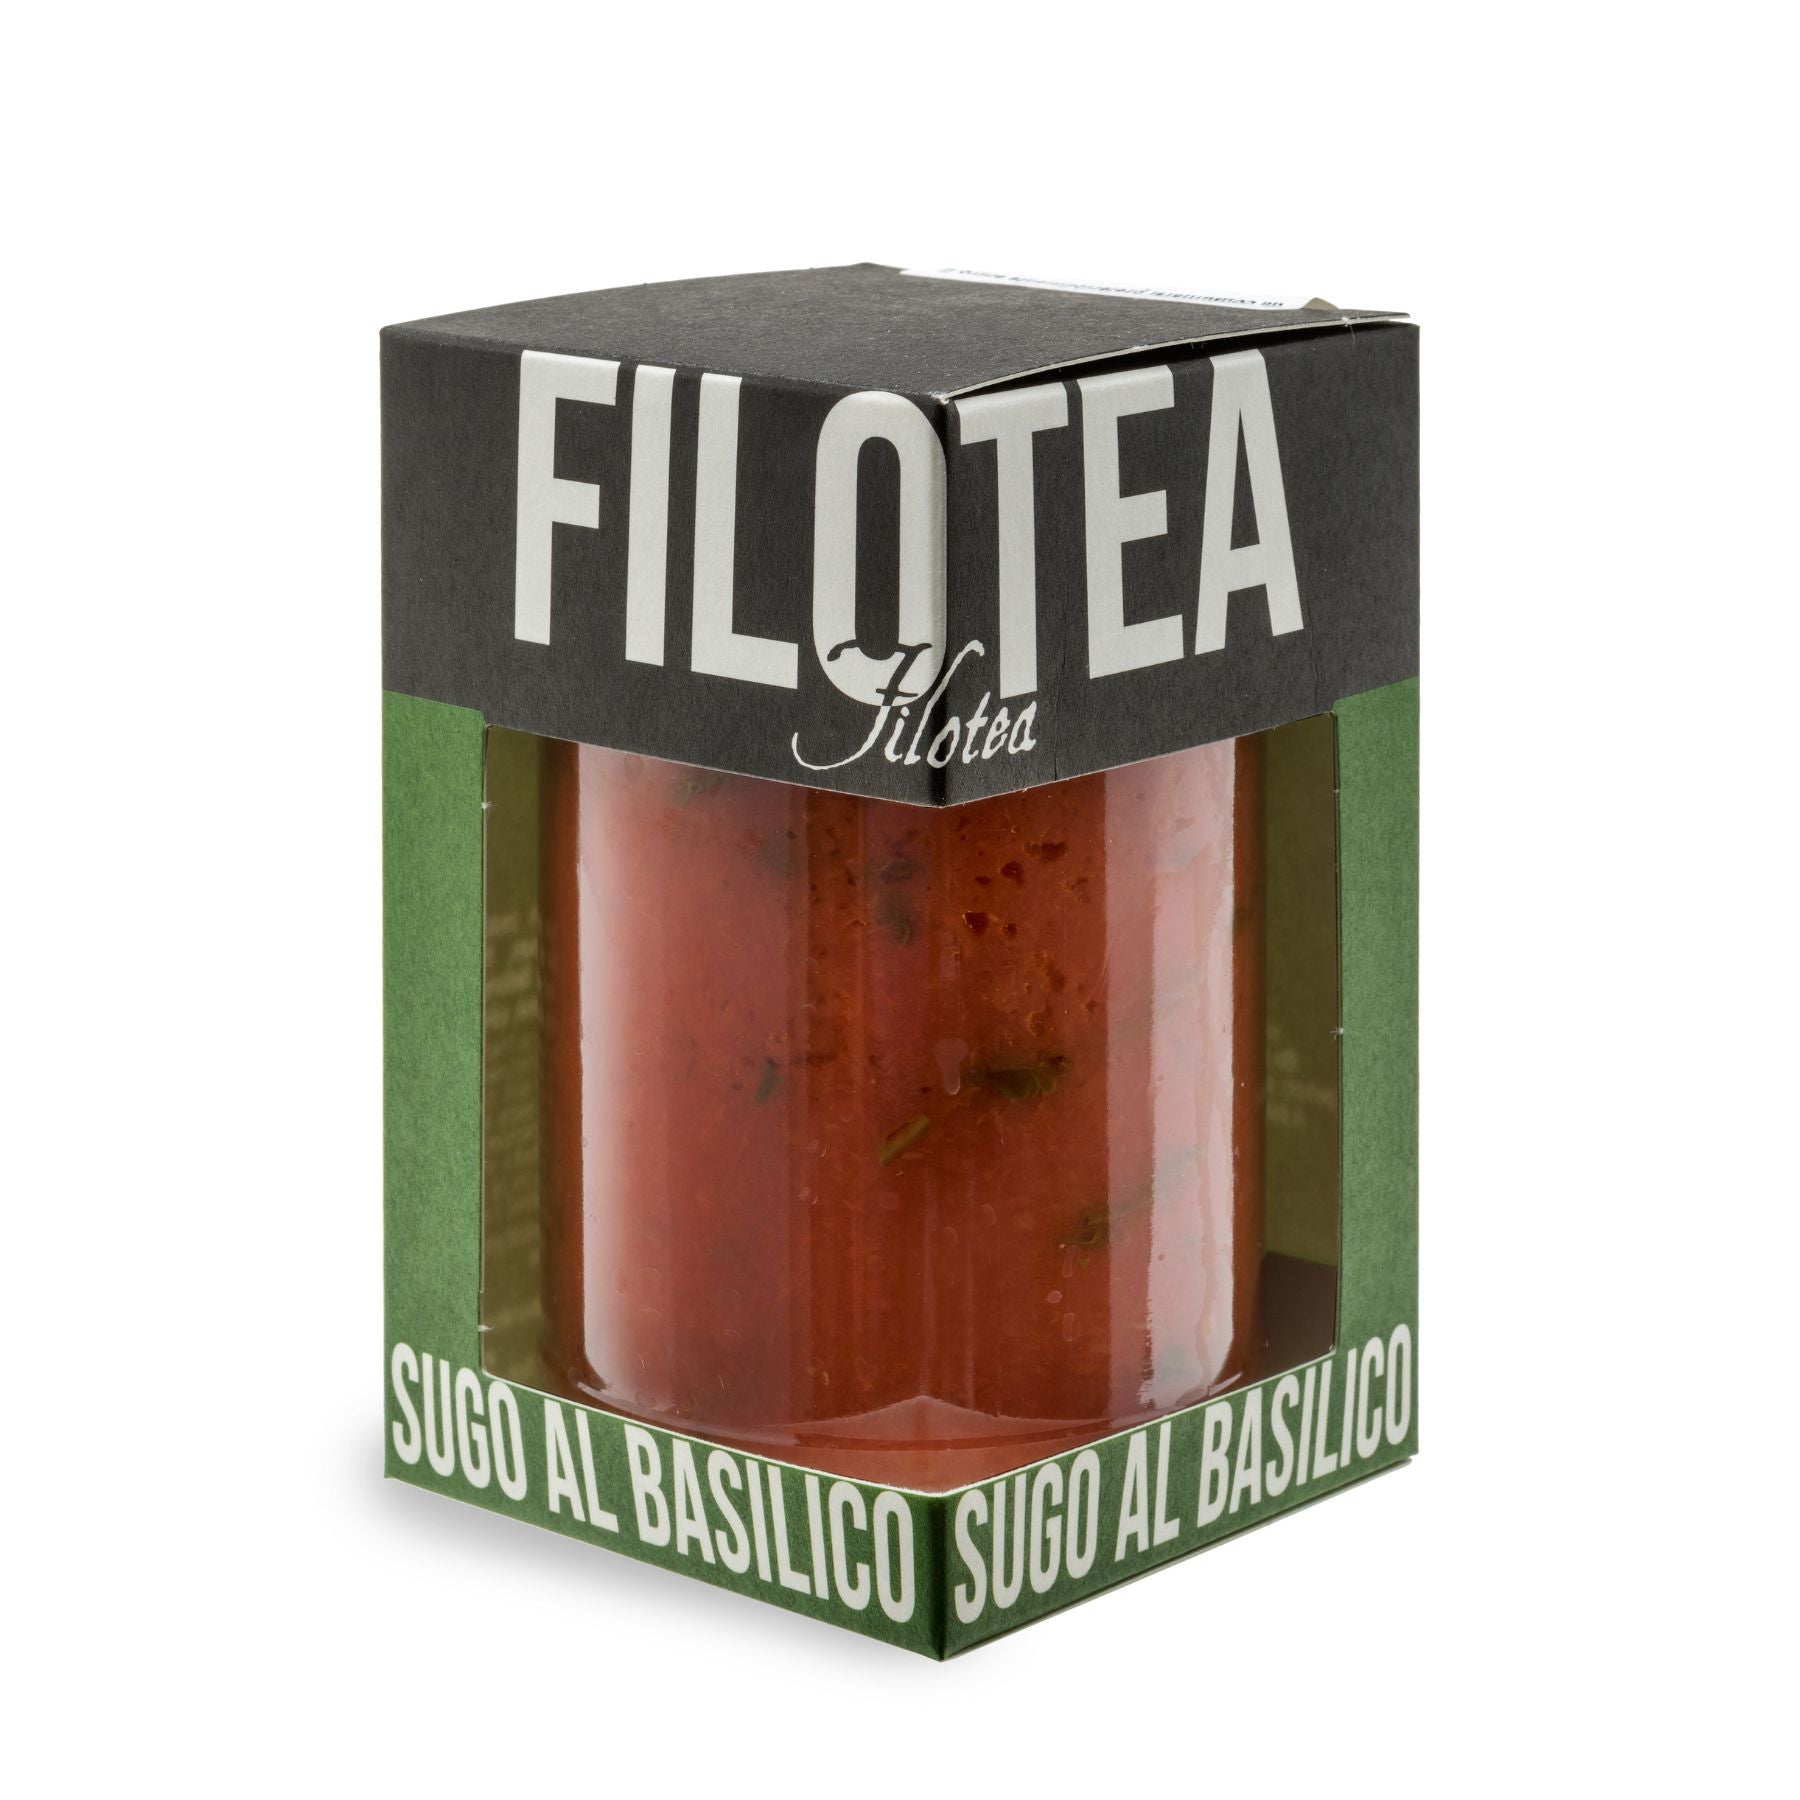 Filotea Tomato & Basil Pasta Sauce 280g | Imported and distributed in the UK by Just Gourmet Foods